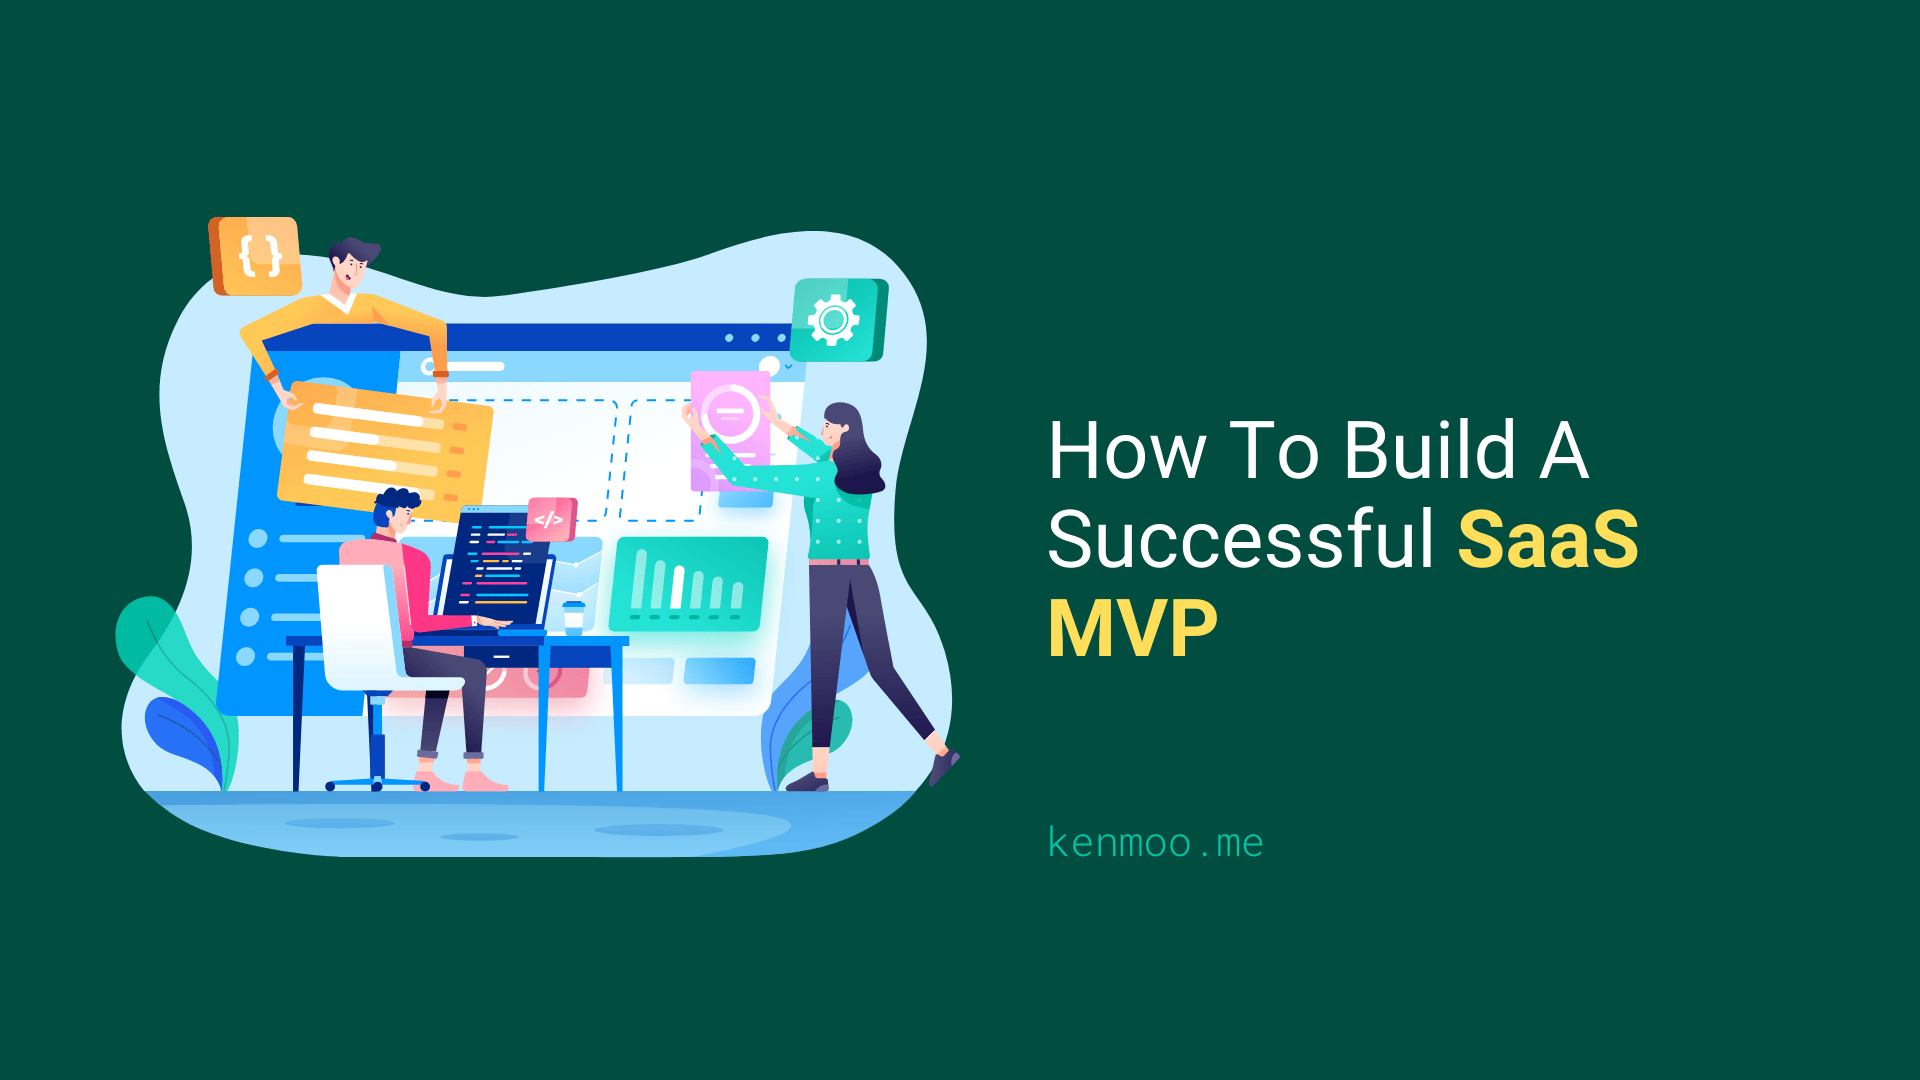 How To Build A Successful SaaS MVP